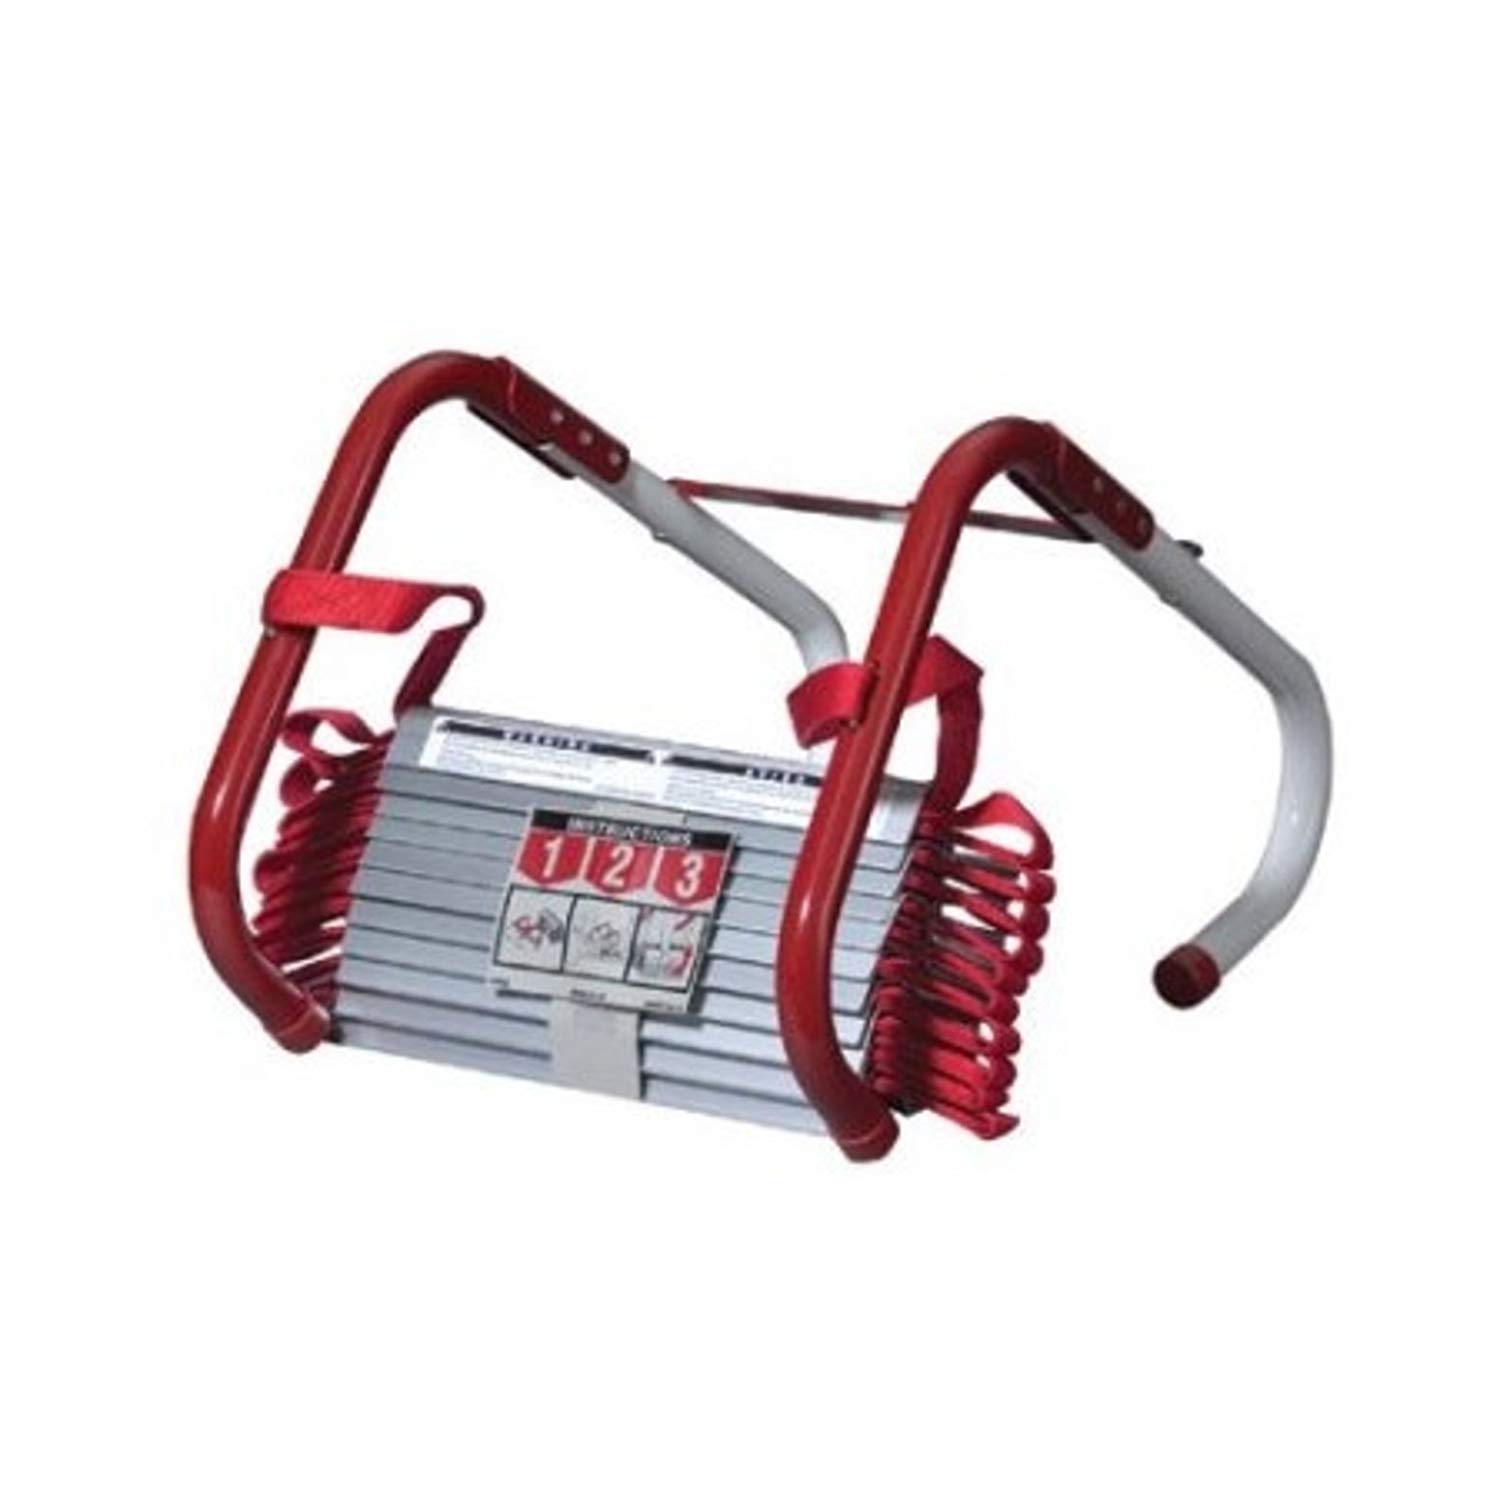 Kiddle Emergency Fire Escape Ladder 13 and 25 Foot Available (2 Story-13 Foot)